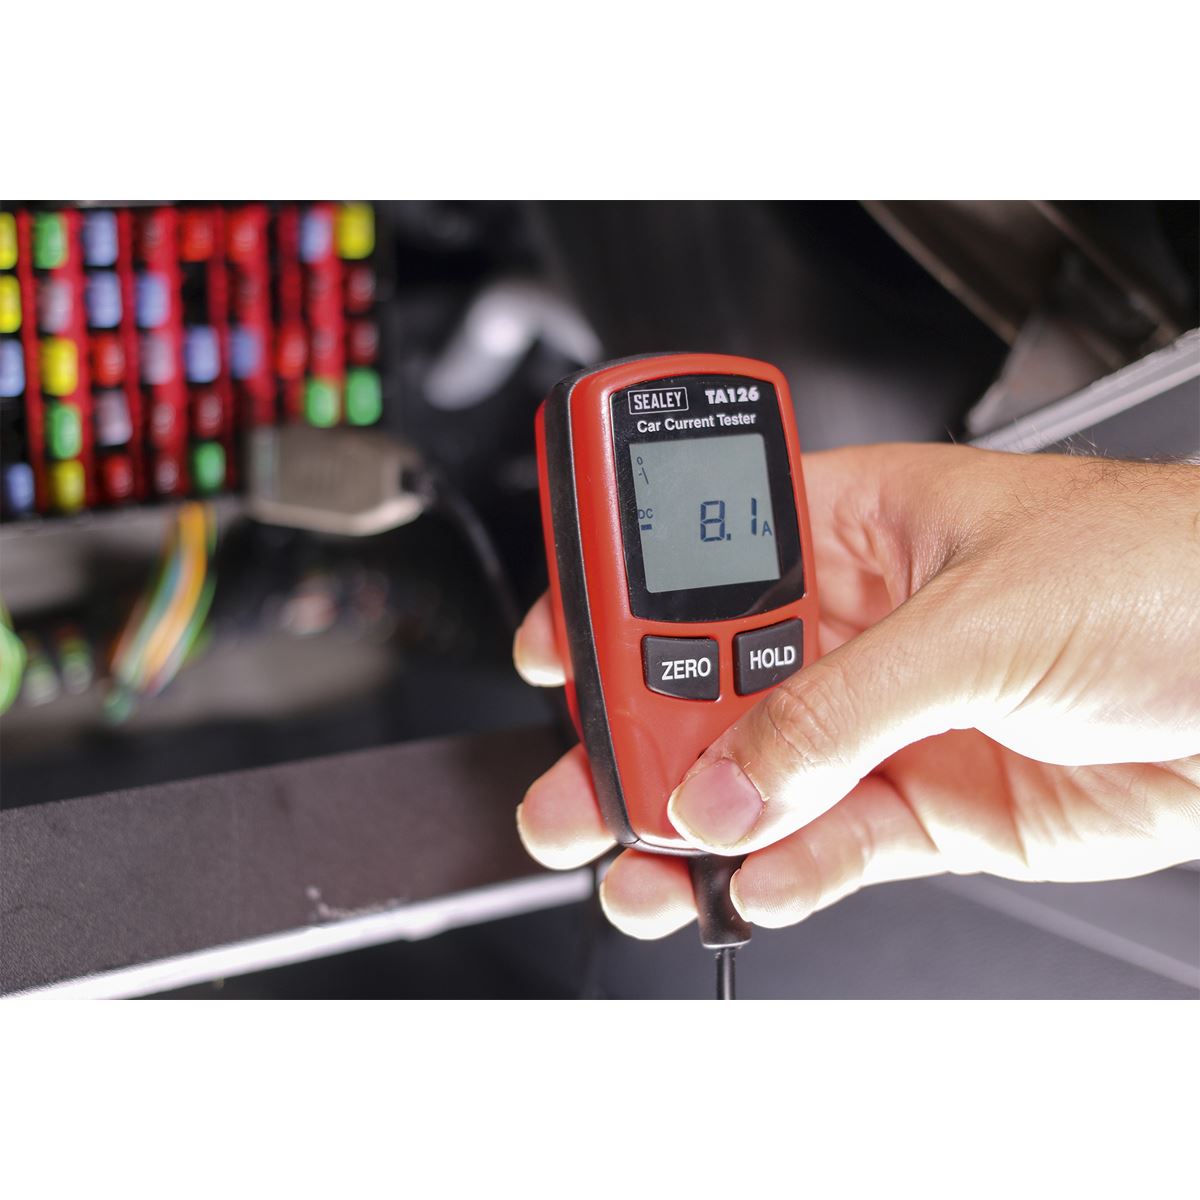 Sealey Automotive Current Tester 30A